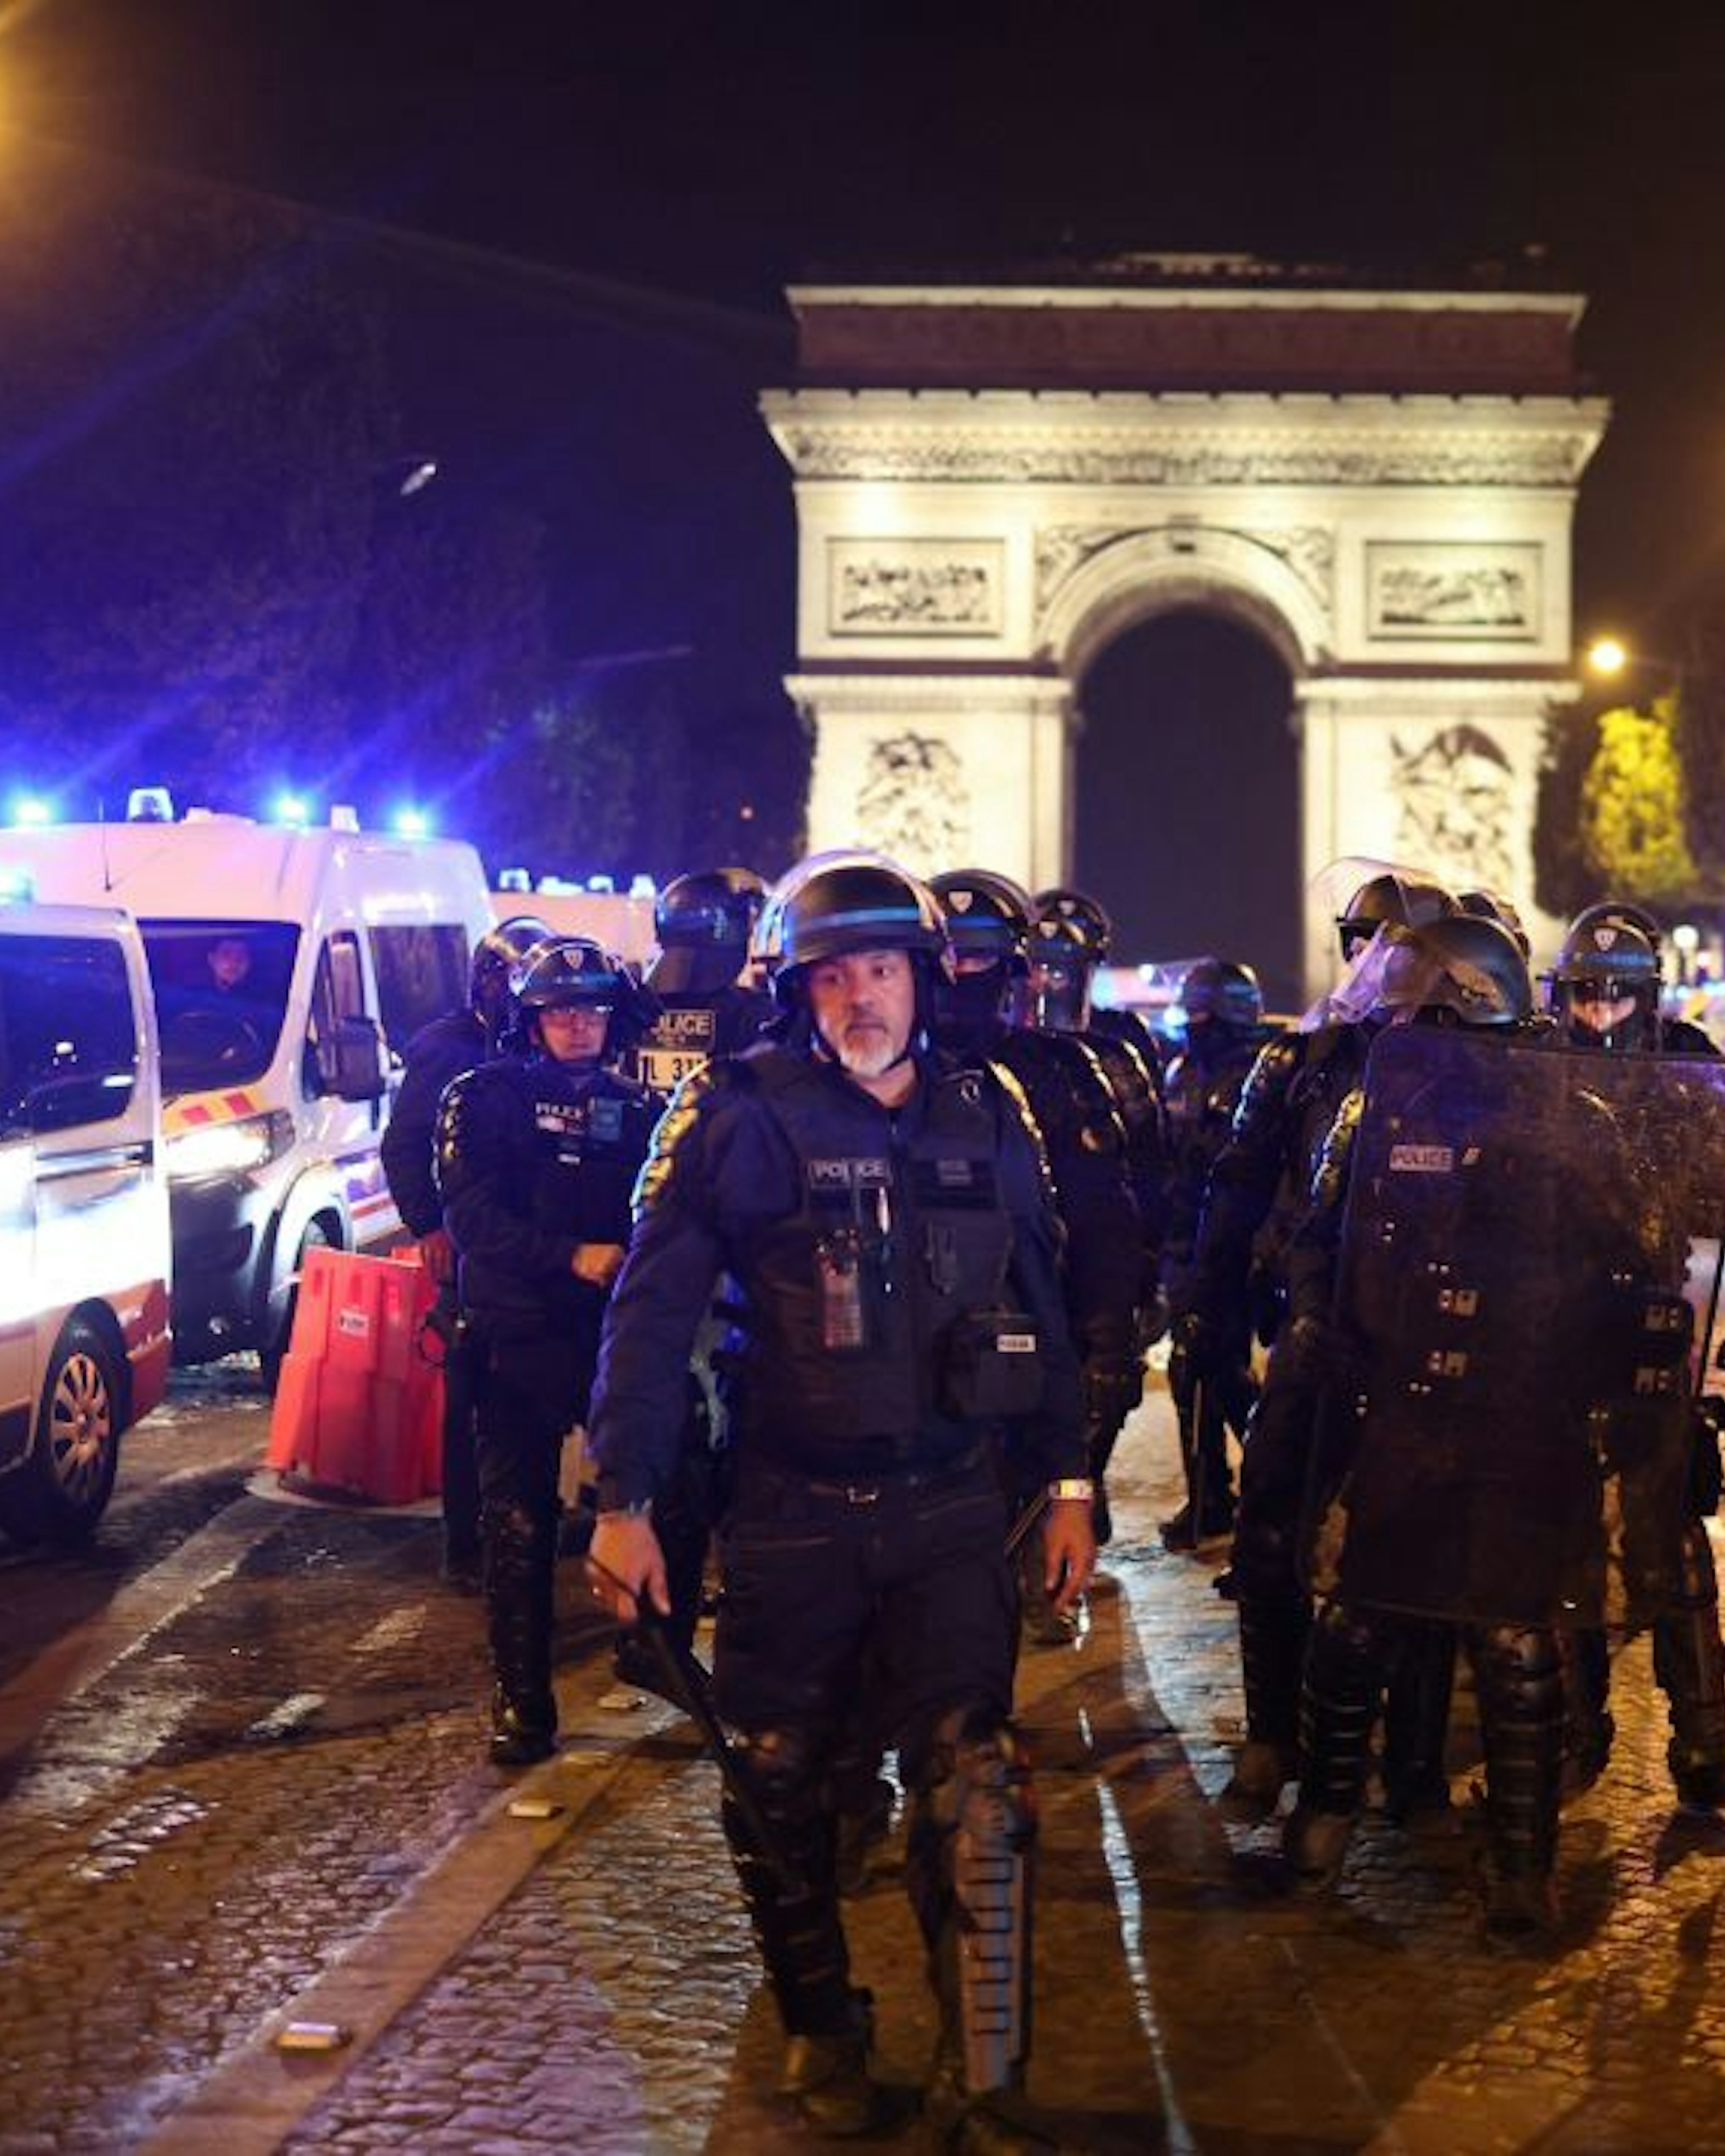 TOPSHOT - French police officers patrol in front of the Arc de Triomphe in the Champs Elysees area of Paris on July 1, 2023, five days after a 17-year-old man was killed by police in Nanterre, a western suburb of Paris. French police arrested 1311 people nationwide during a fourth consecutive night of rioting over the killing of a teenager by police, the interior ministry said on July 1, 2023. France had deployed 45,000 officers overnight backed by light armoured vehicles and crack police units to quell the violence over the death of 17-year-old Nahel, killed during a traffic stop in a Paris suburb on June 27, 2023. (Photo by CHARLY TRIBALLEAU / AFP) (Photo by CHARLY TRIBALLEAU/AFP via Getty Images)